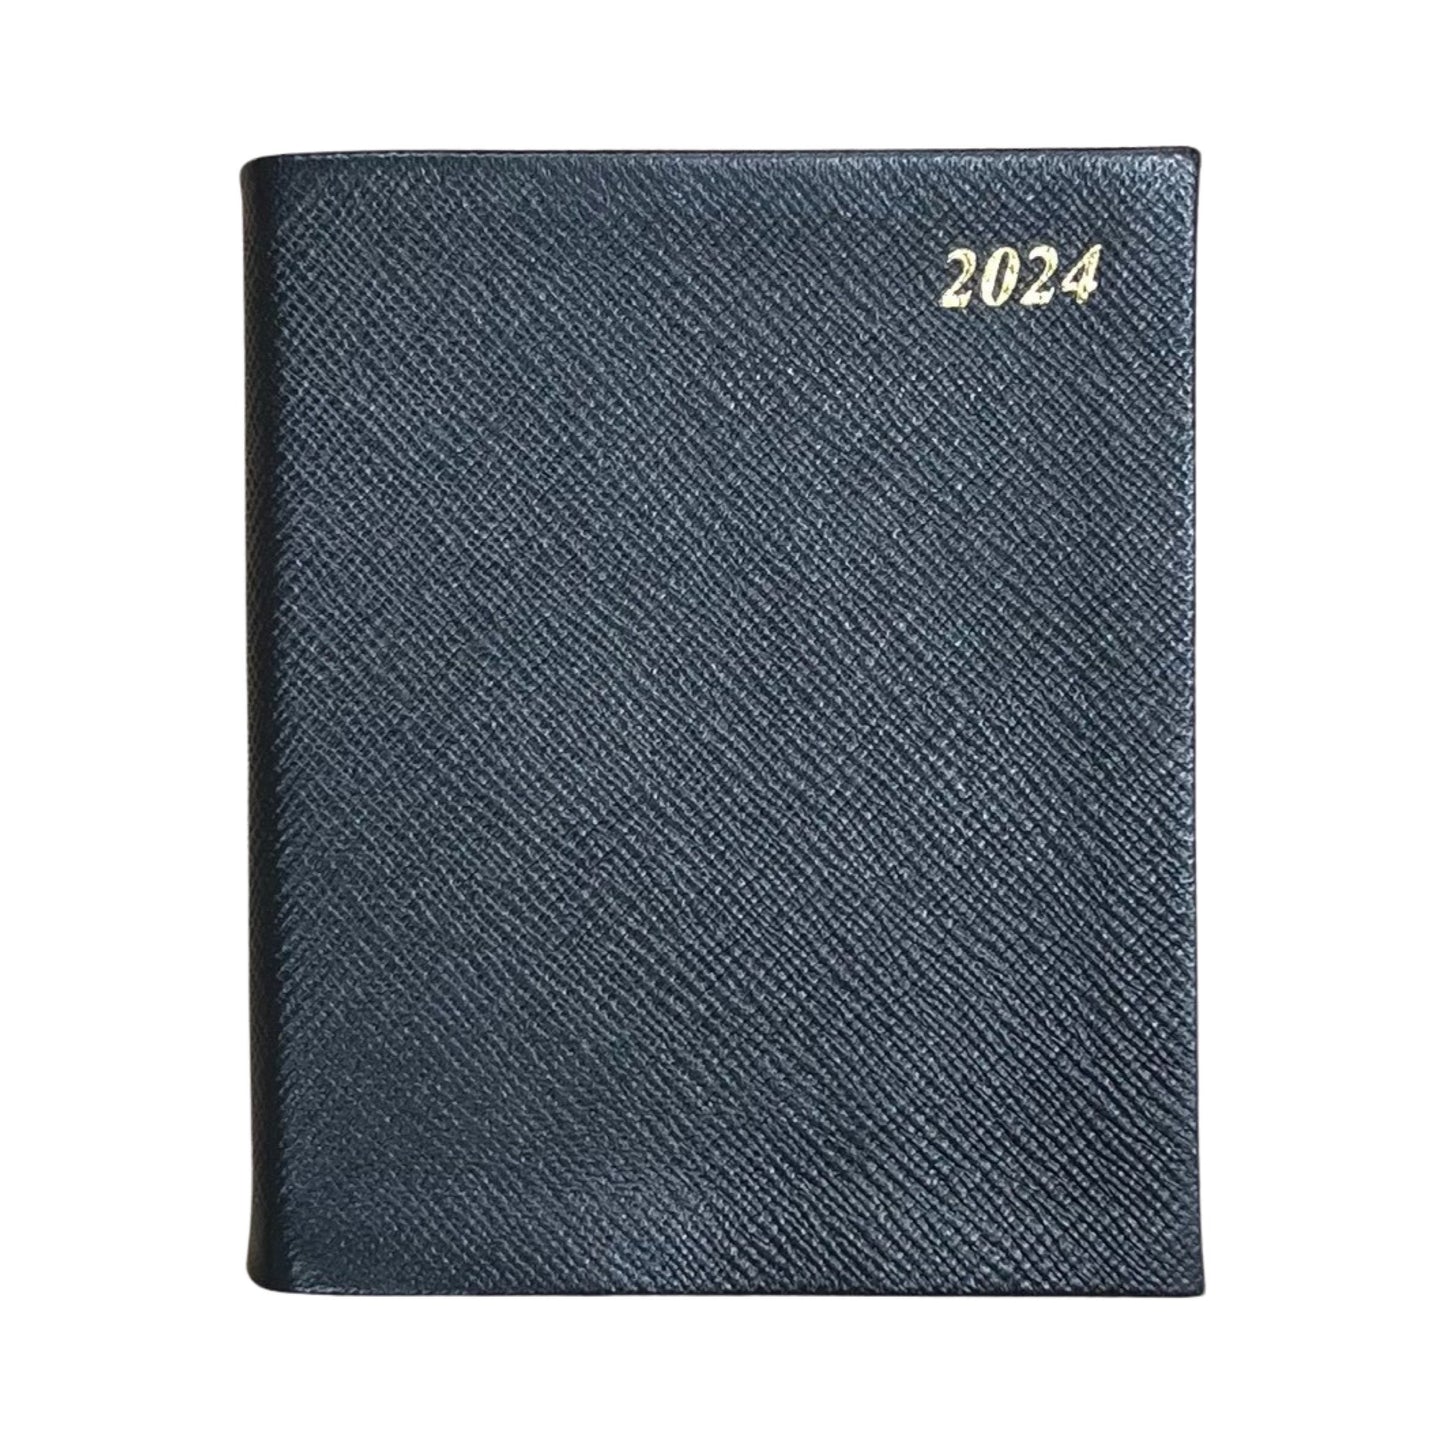 2024 CROSSGRAIN Leather Pocket Calendar Book | 5 x 4" | Thick, One Day Per Page | D164L